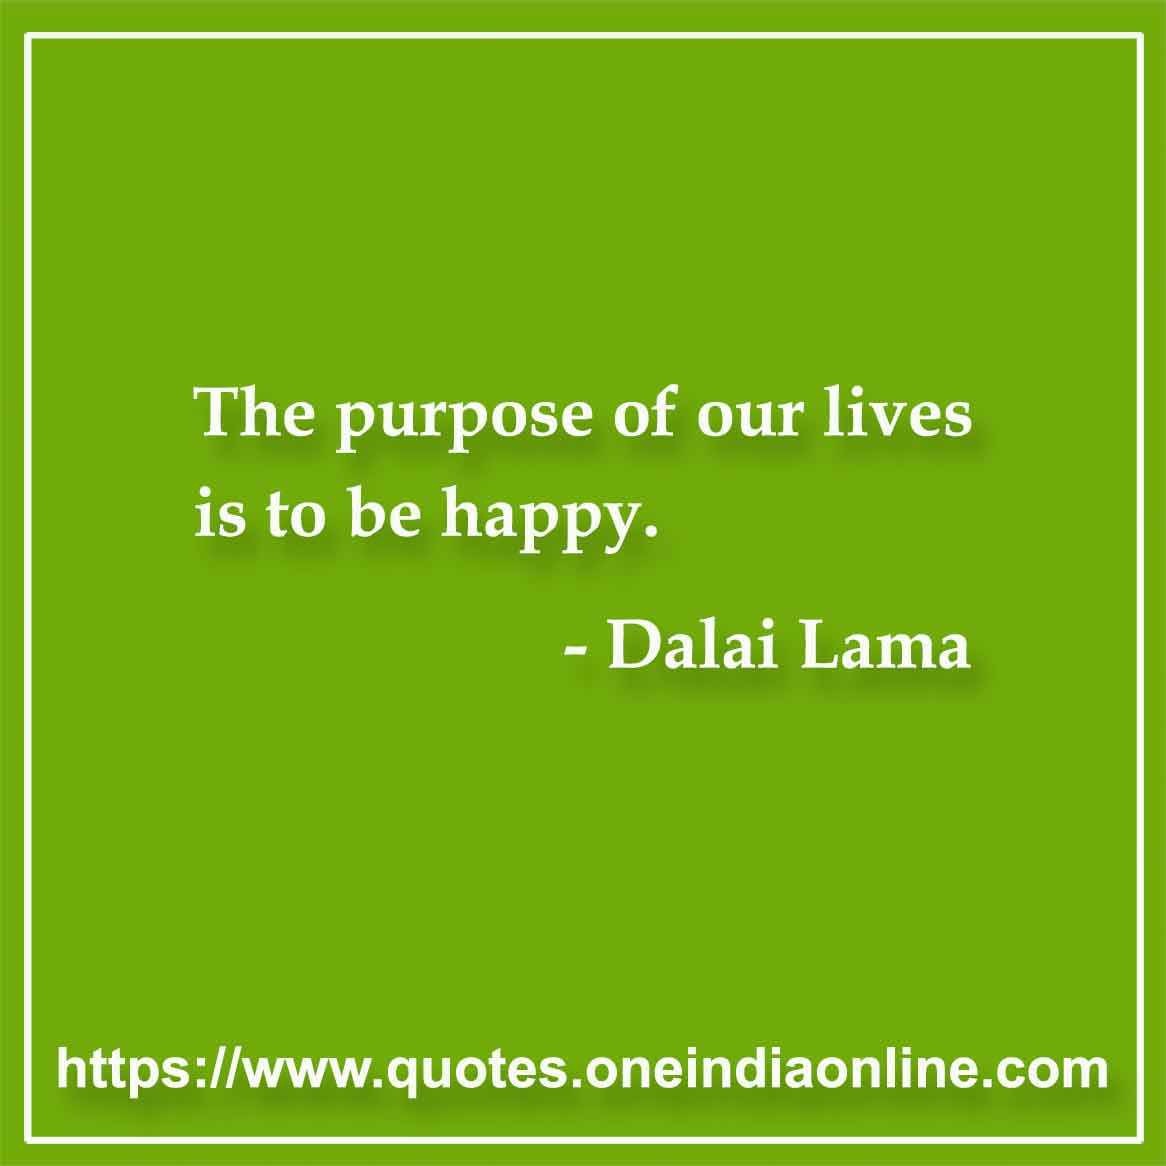 The purpose of our lives is to be happy.

- Dalai Lama 